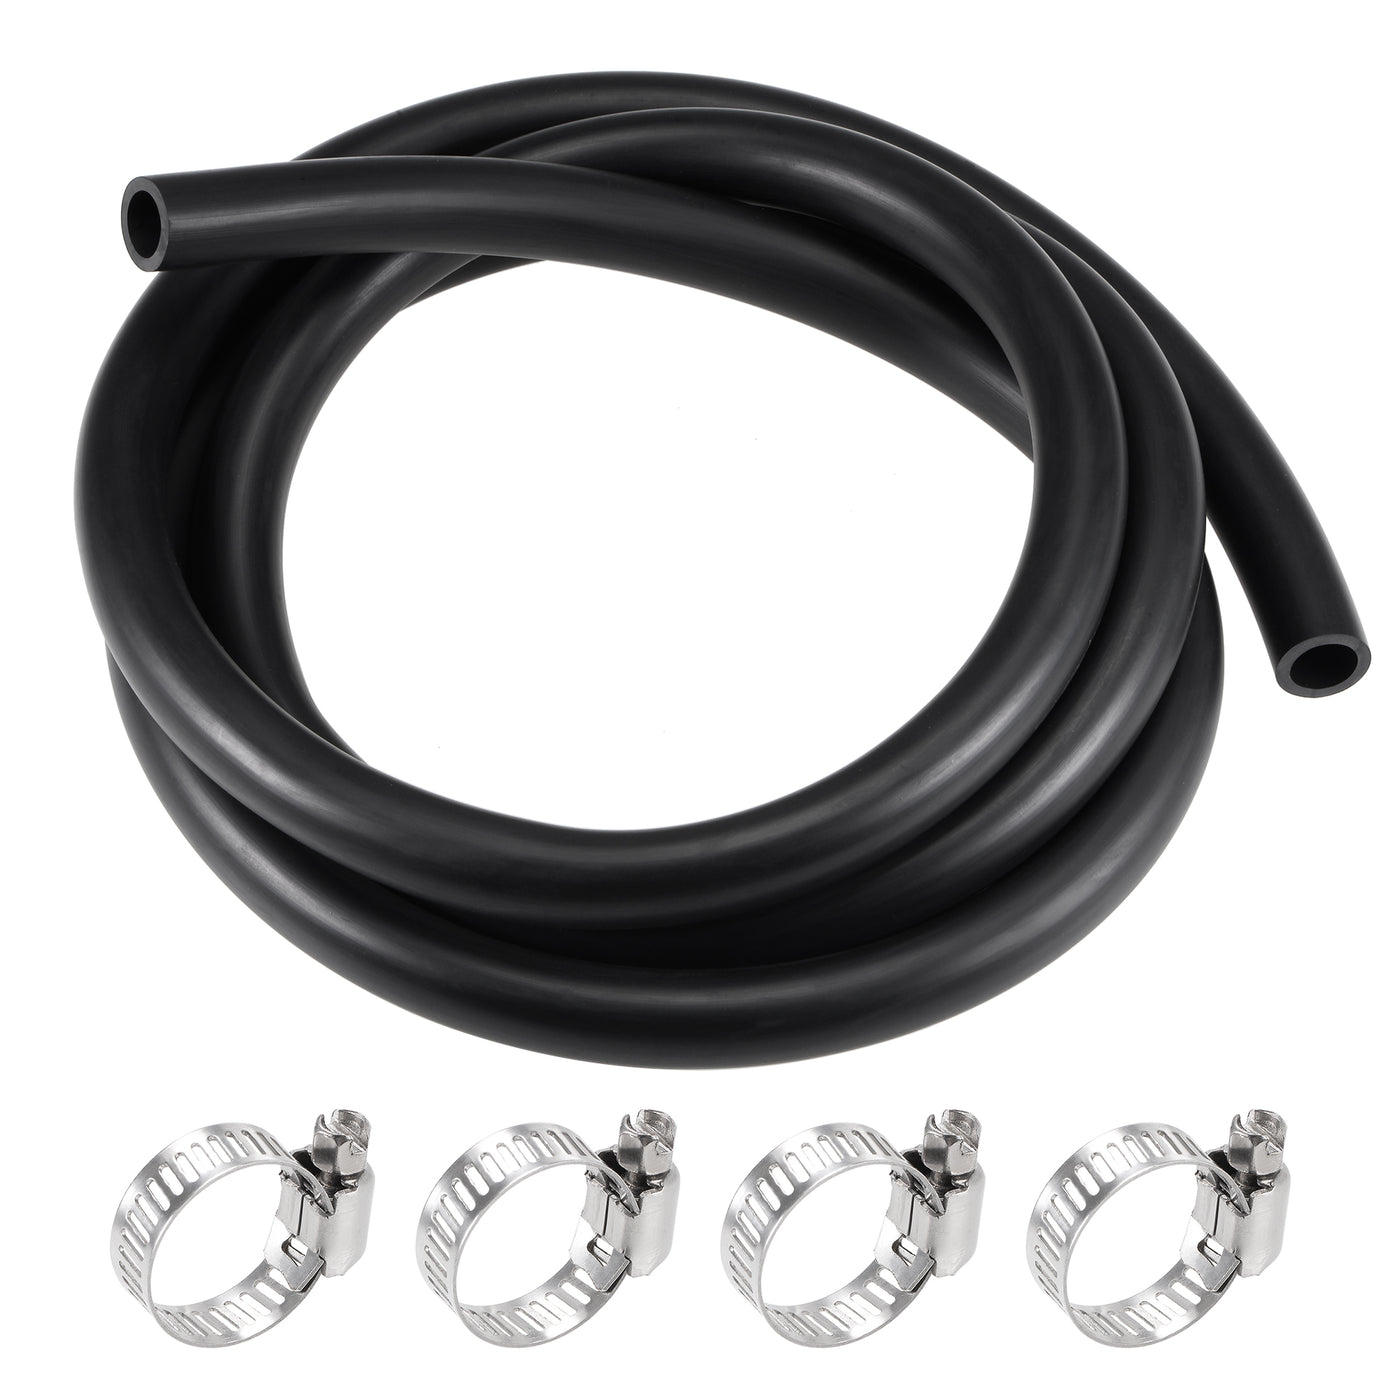 Uxcell Uxcell Fuel Line Hose 5mm ID 10mm OD 6.6ft Oil Line & Fuel Pipe Rubber Water Hose Black, 4 Clamps